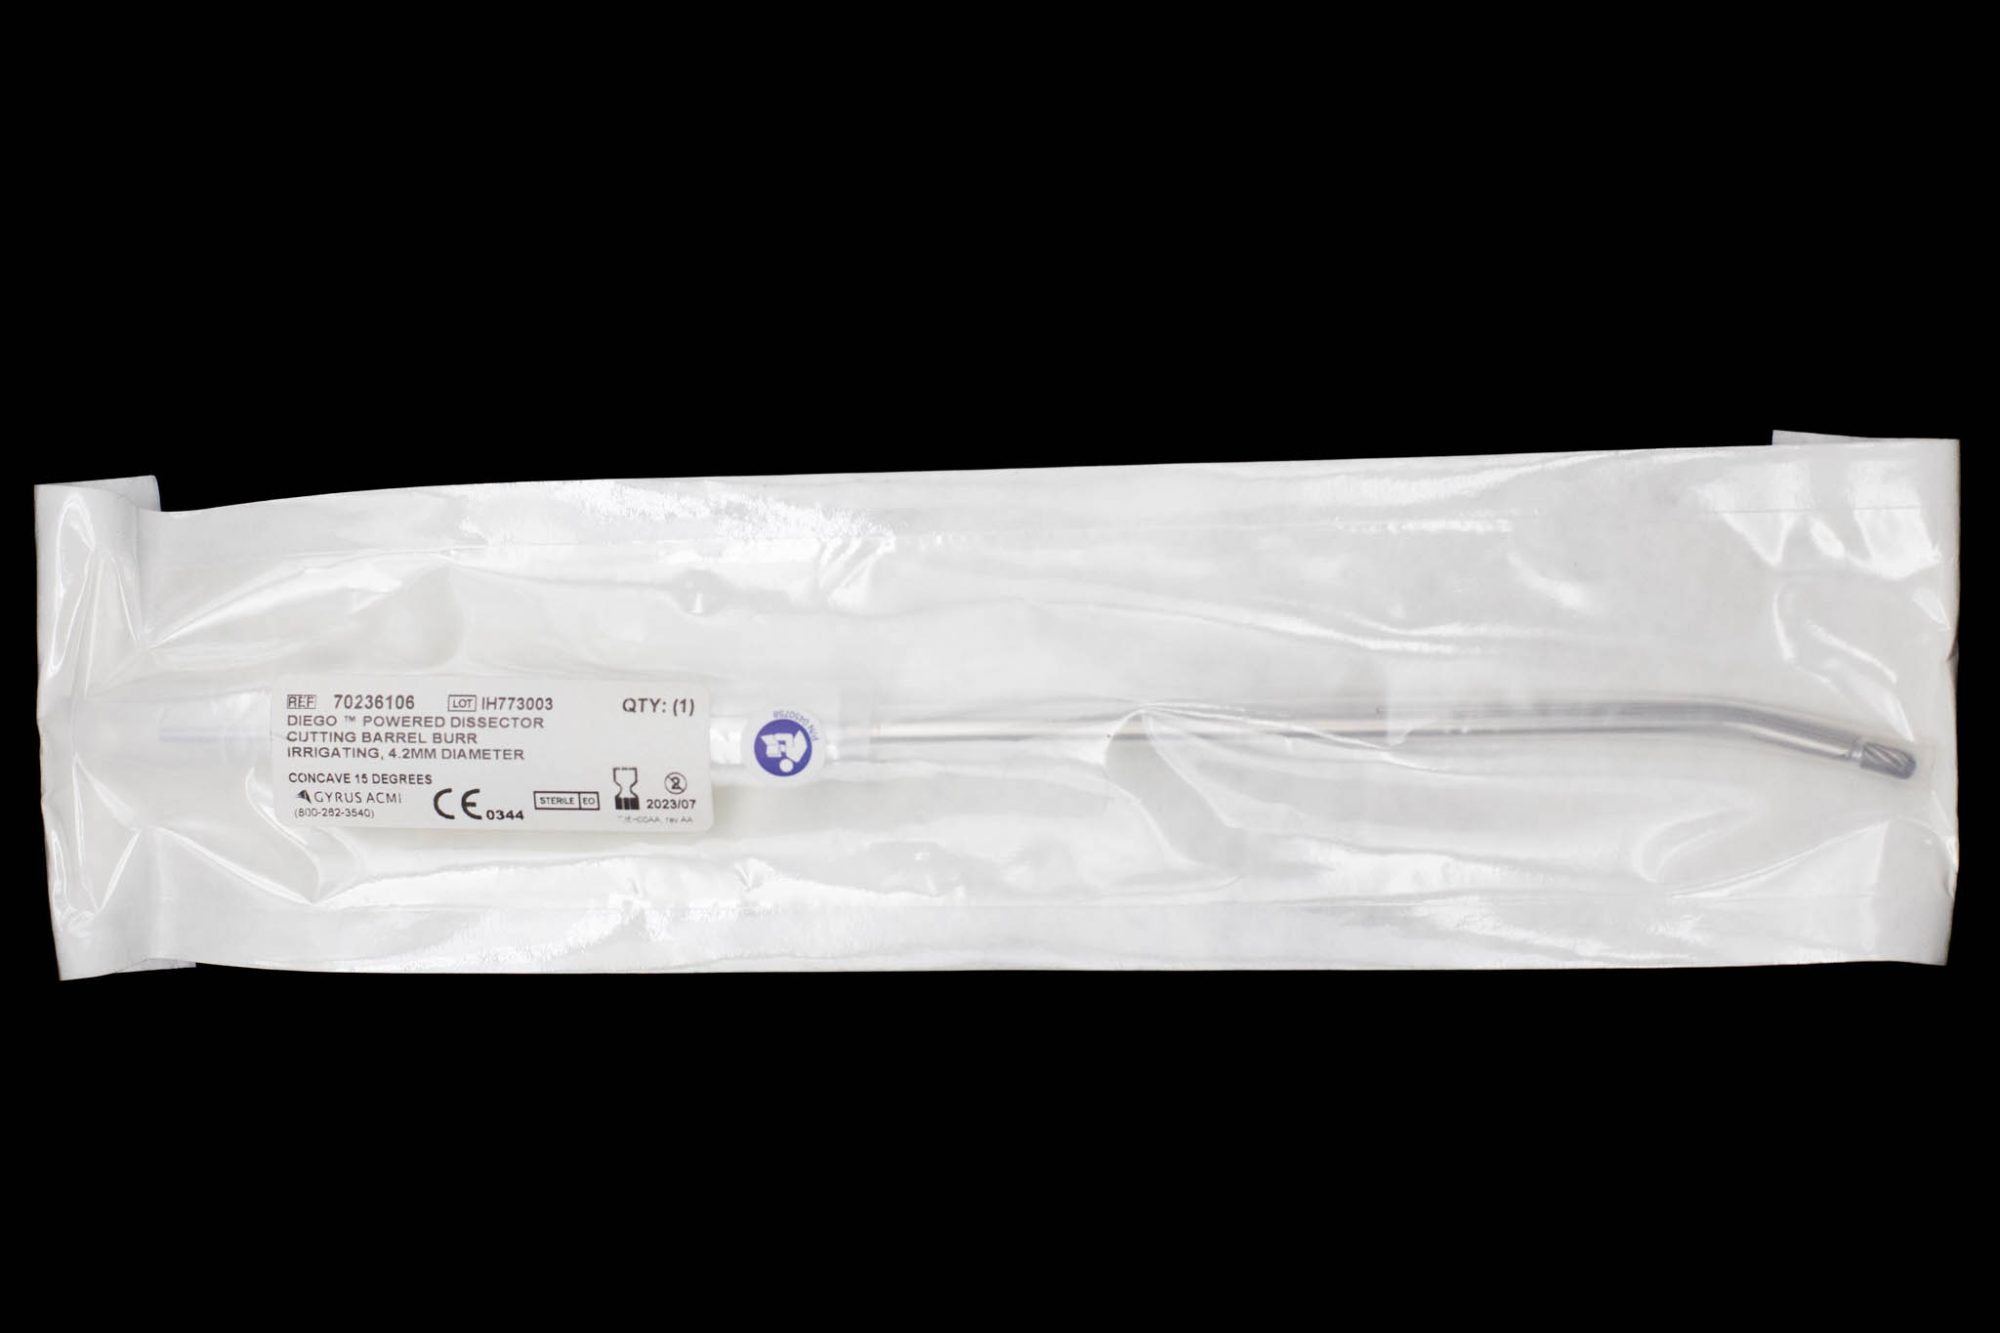 Disposable Diego Powered Dissector, Cutting Barrel Burr, Irrigating, 4.2mm Dia, Concave 15 Deg. - 70236106 [1/Bag]